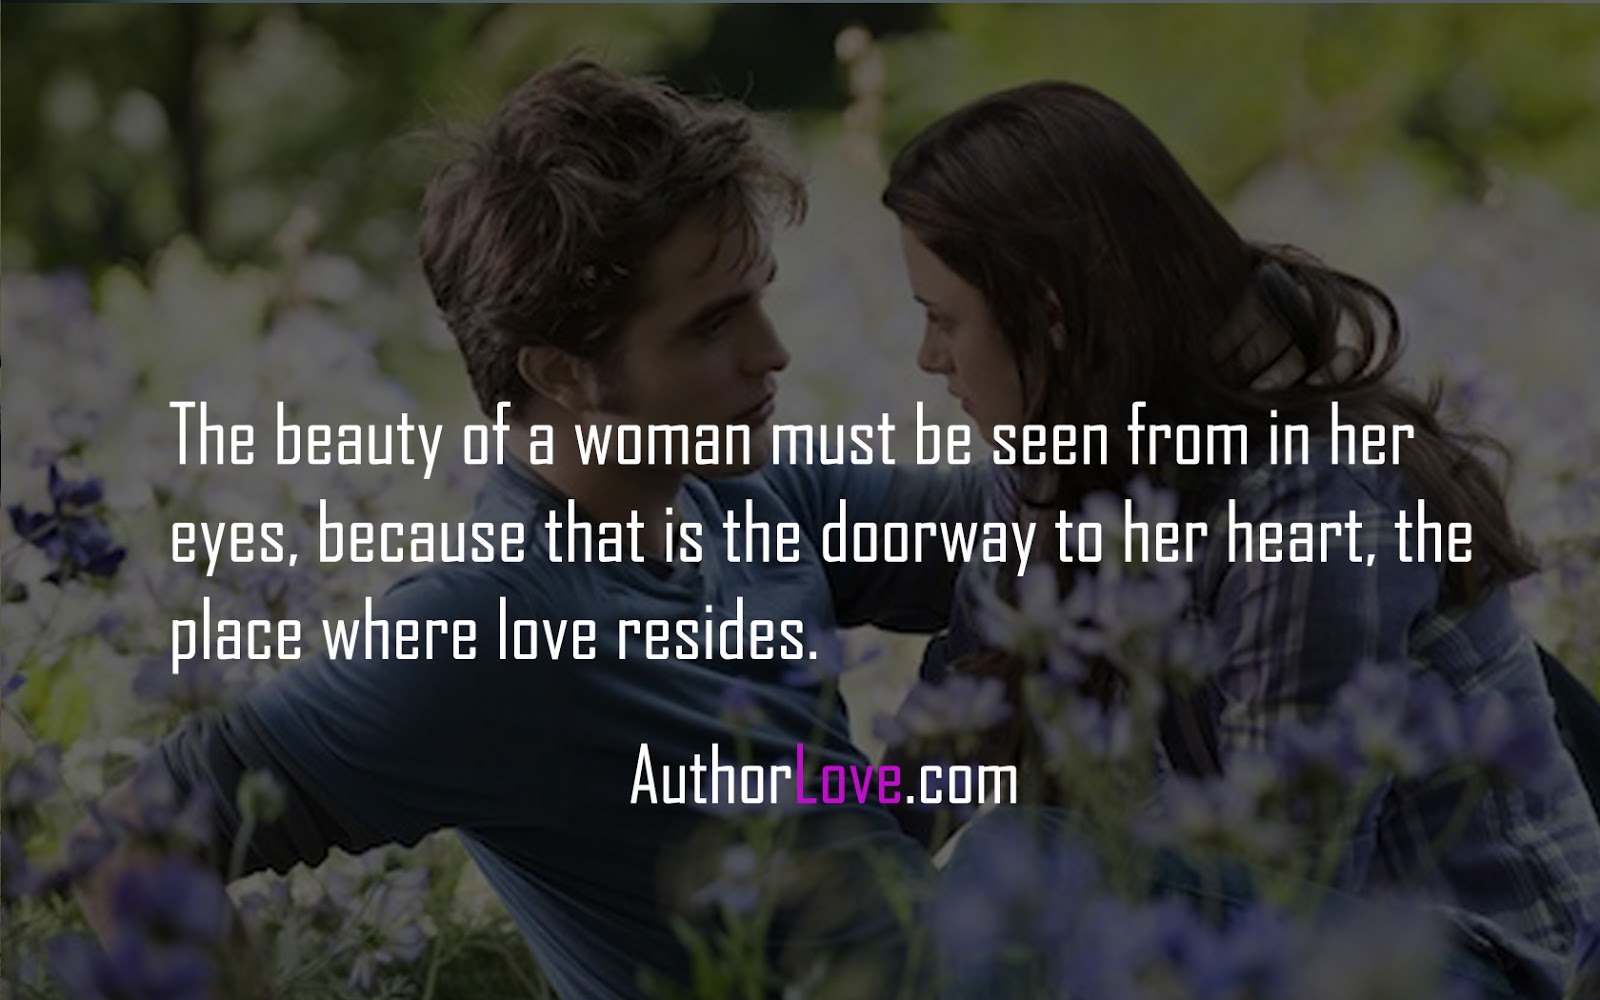 The beauty of a woman must be seen from in her eyes | Love Quotes ...